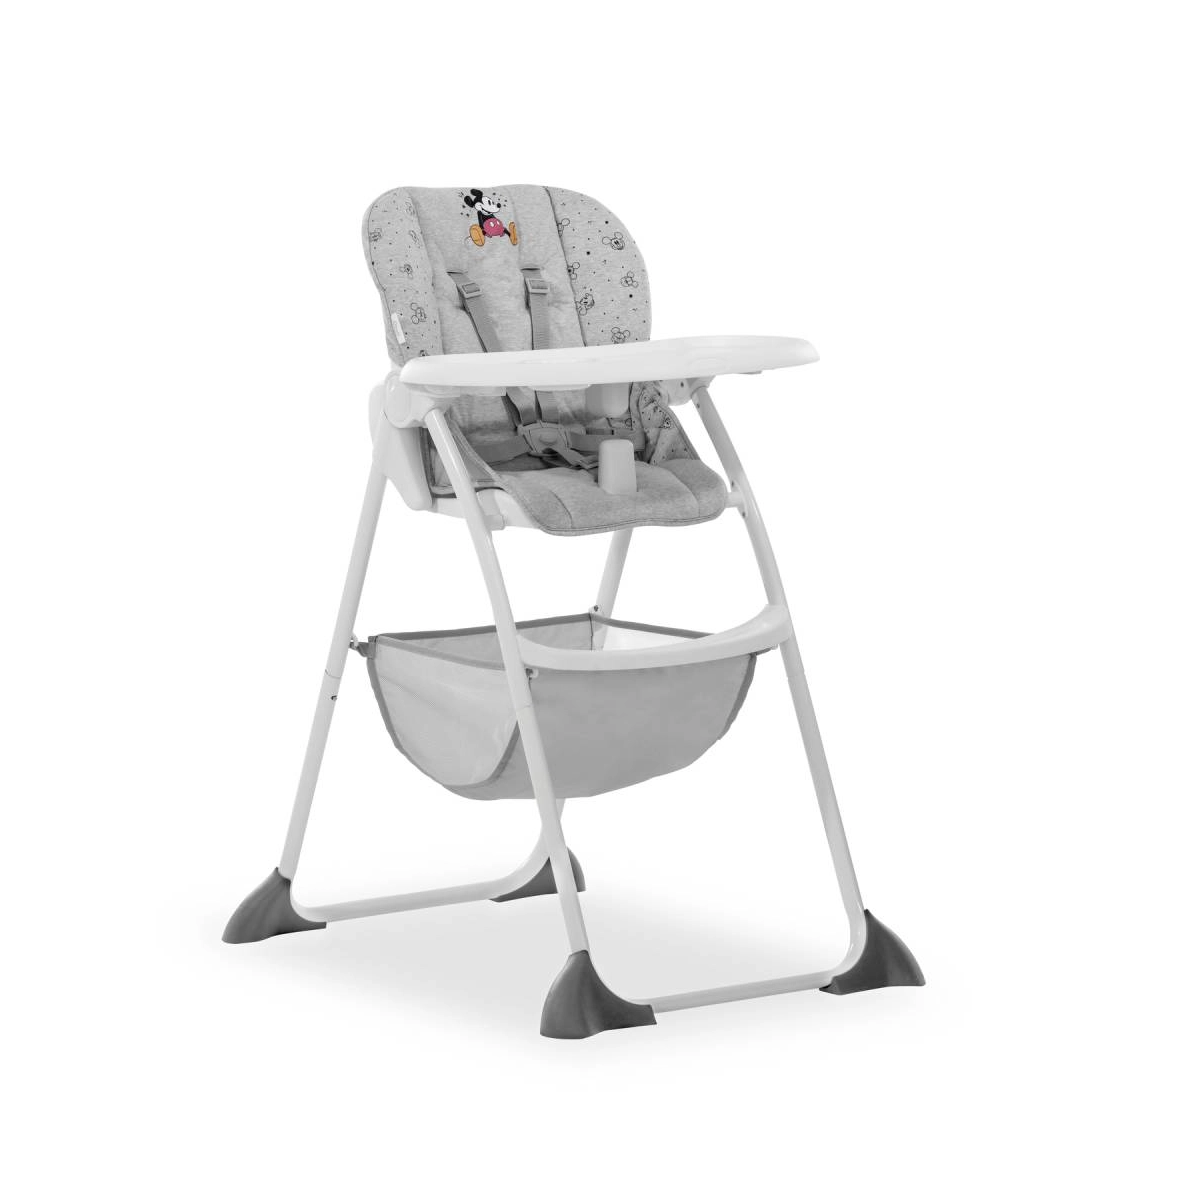 Hauck Sit N Fold Micky Mouse Highchair